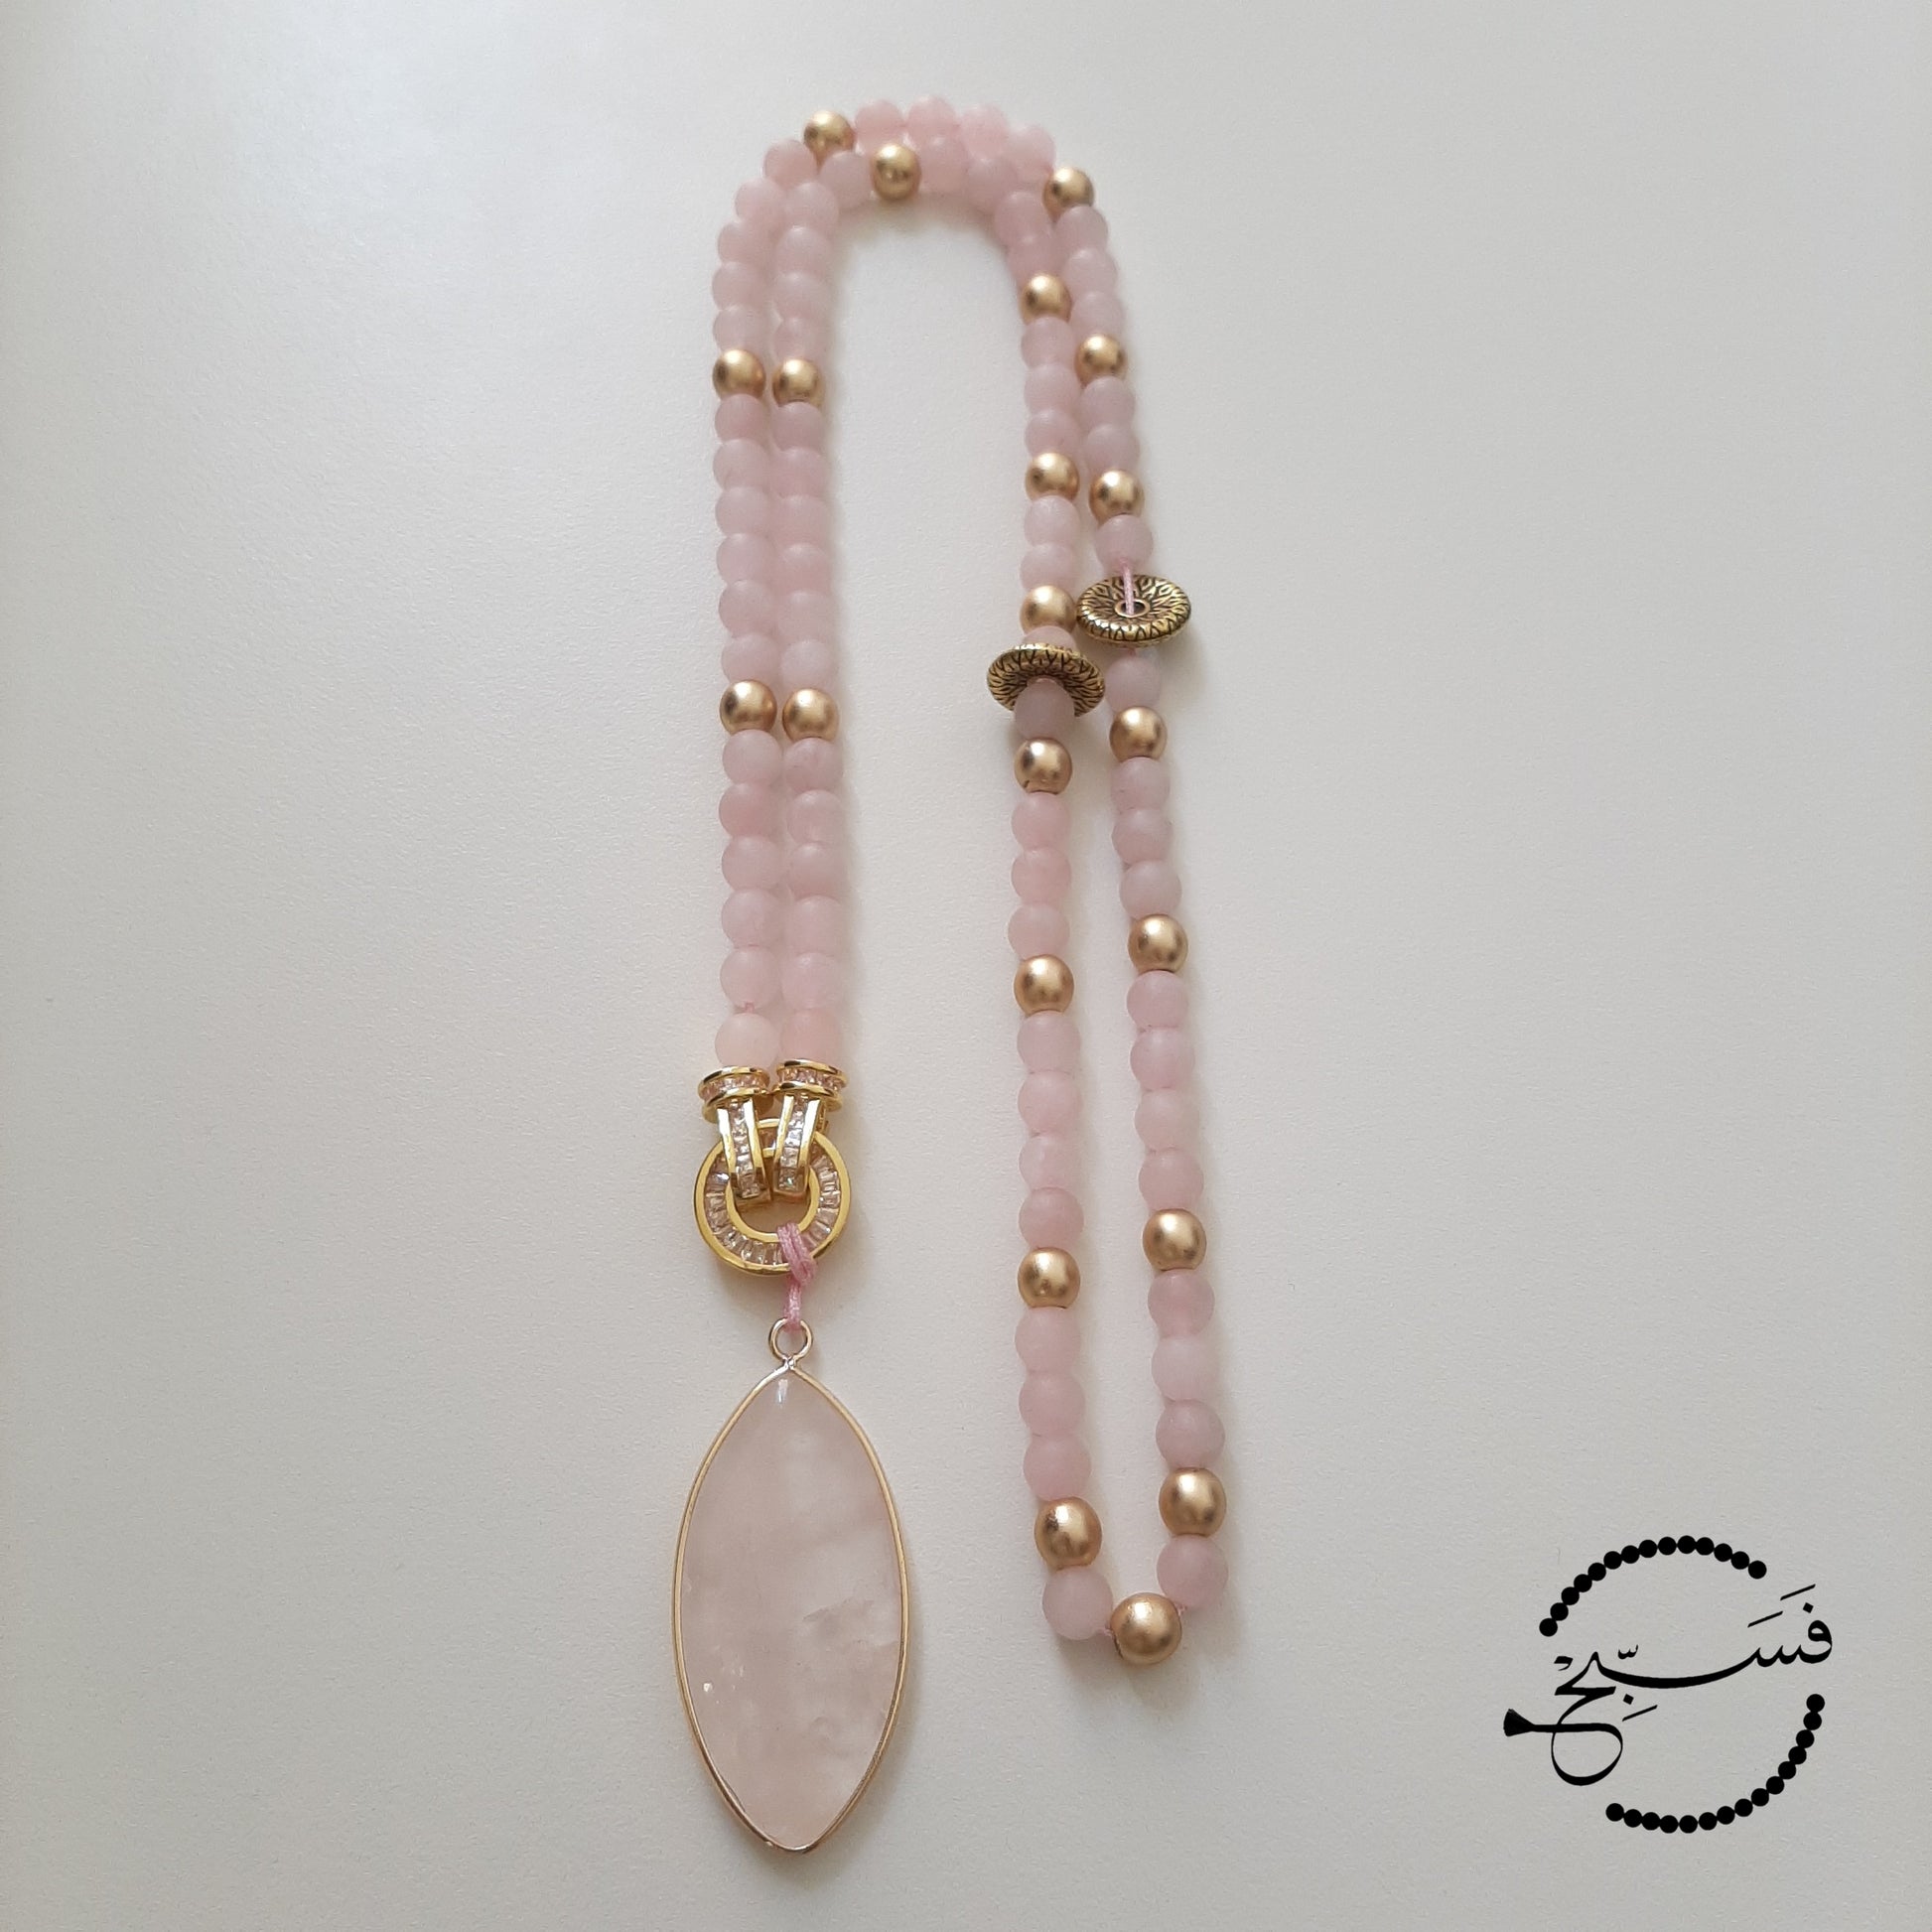 Rose quartz necklace tasbih. This 99 bead tasbih is made with a natural rose quartz pendant and beads. A stunning gold clasp allows for easy opening, so that the tasbih can be worn as a necklace.